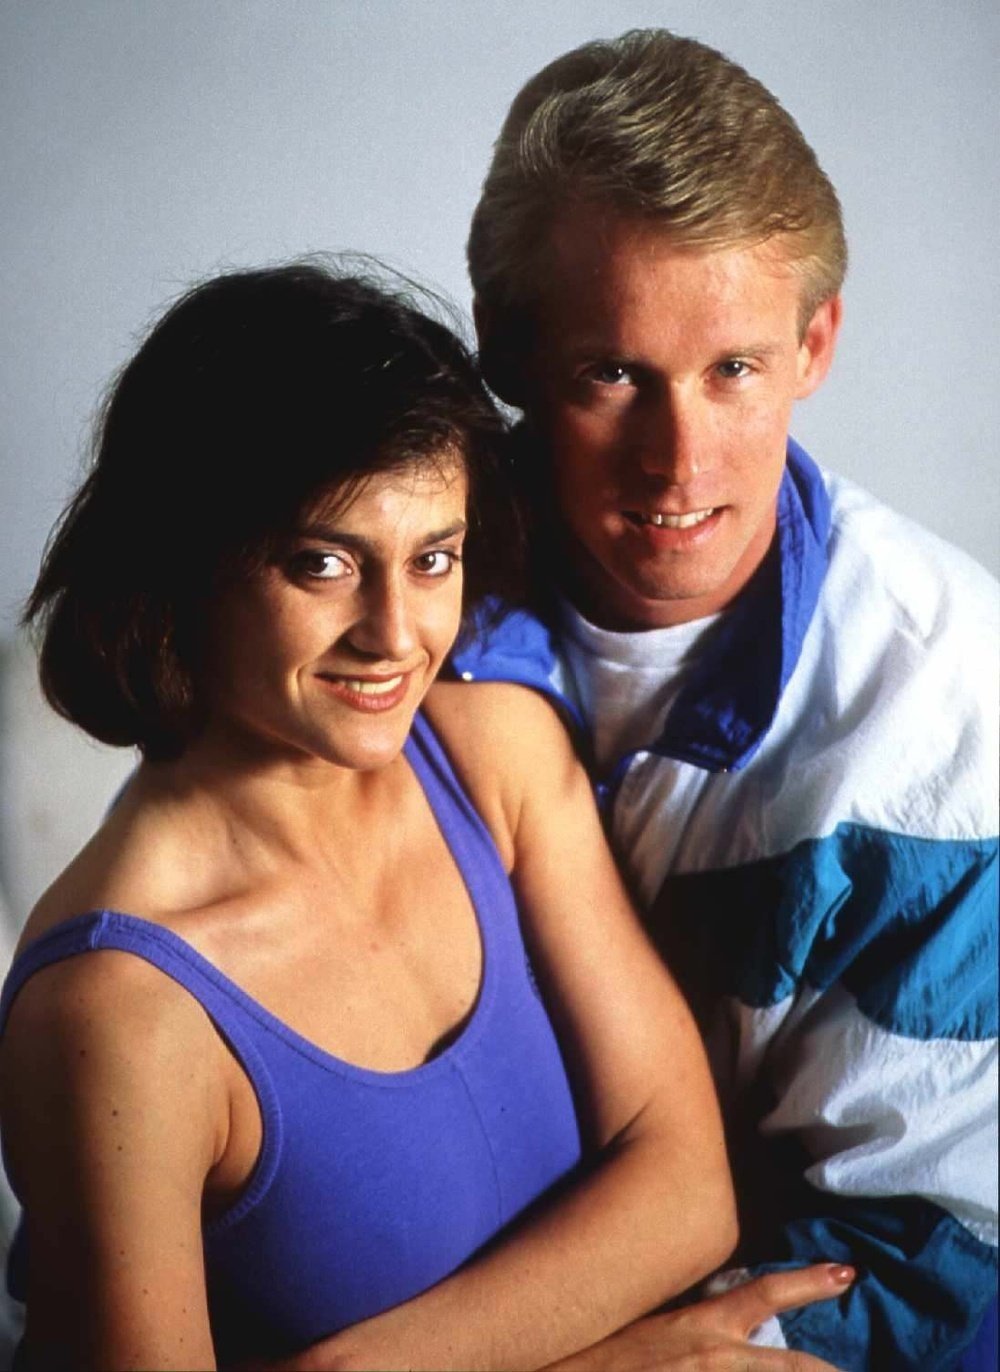 1991.Venice,California Nadia Comaneci And Bart Conner (Photo By Paul Harris/Getty Images)